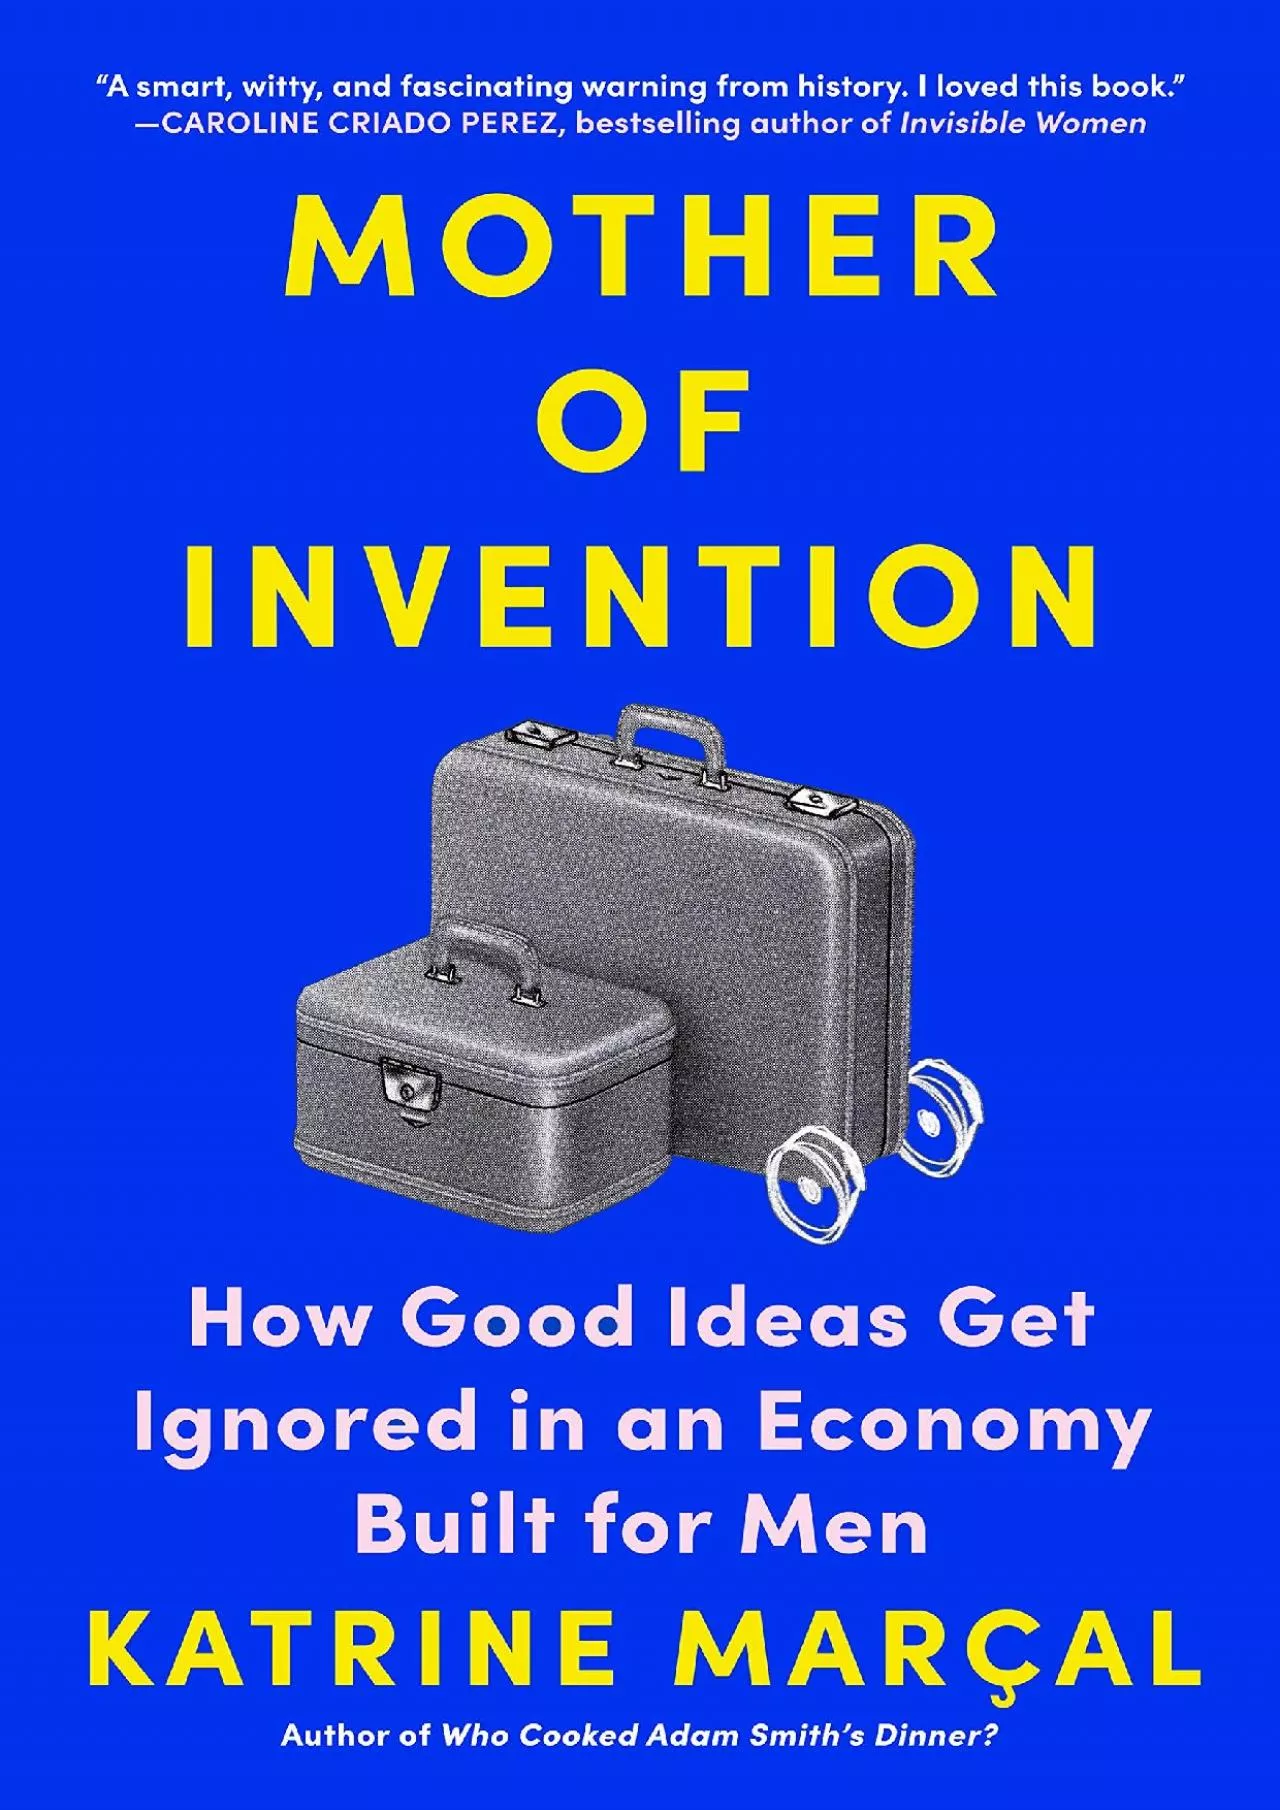 [BOOK]-Mother of Invention: How Good Ideas Get Ignored in an Economy Built for Men